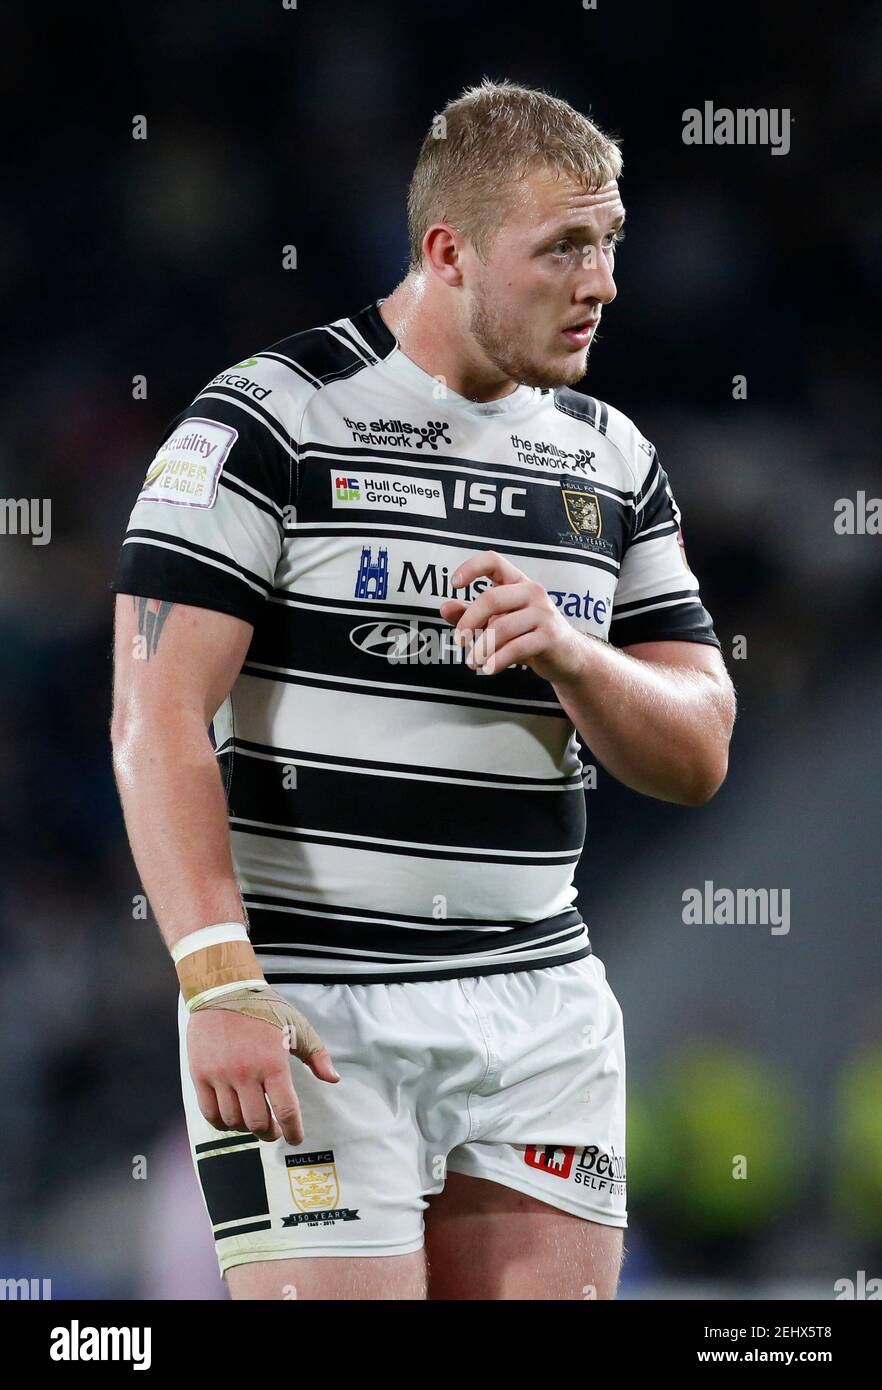 Rugby League - Hull FC v Wigan Warriors - First Utility Super League - The Kingston Communications Stadium - 23/7/15 Jordan Abdull - Hull FC  Mandatory Credit: Action Images / Ed Sykes  EDITORIAL USE ONLY. Stock Photo